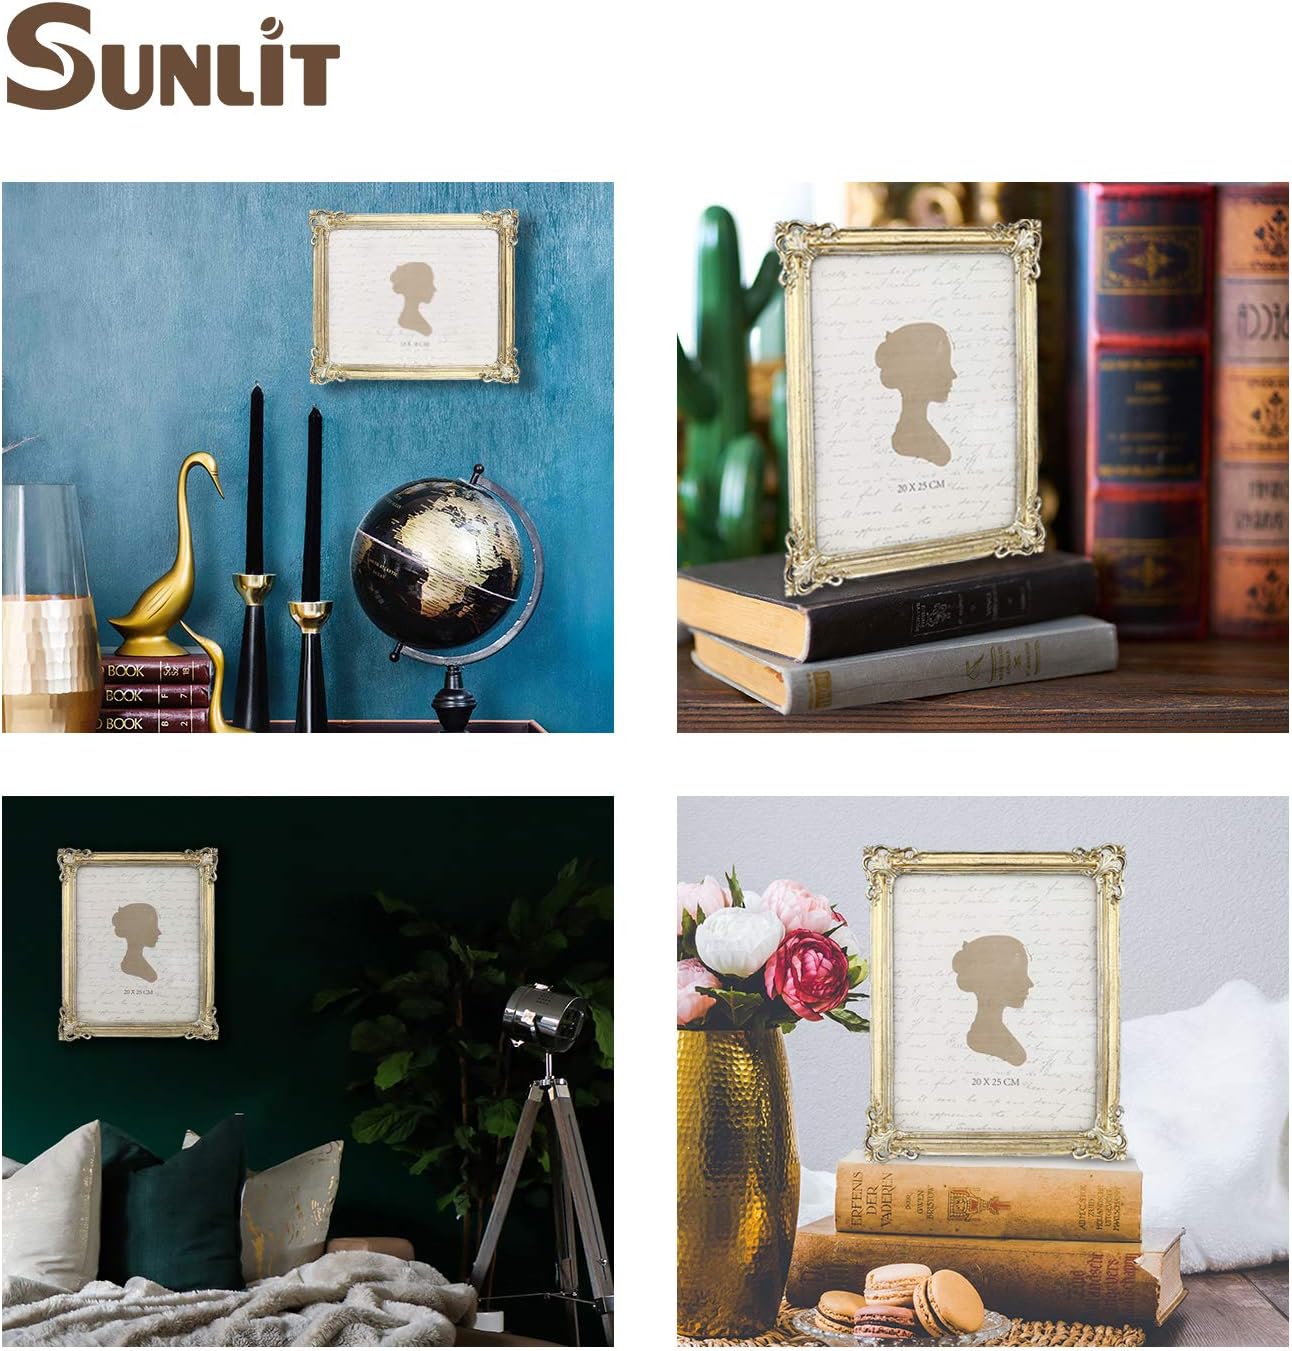 Sunlit Vintage Picture Frame 4x6 Inch, Luxury Antique Photo Frames with Glass Front, Photo Display, Tabletop Wall Hanging, Gift Ideas